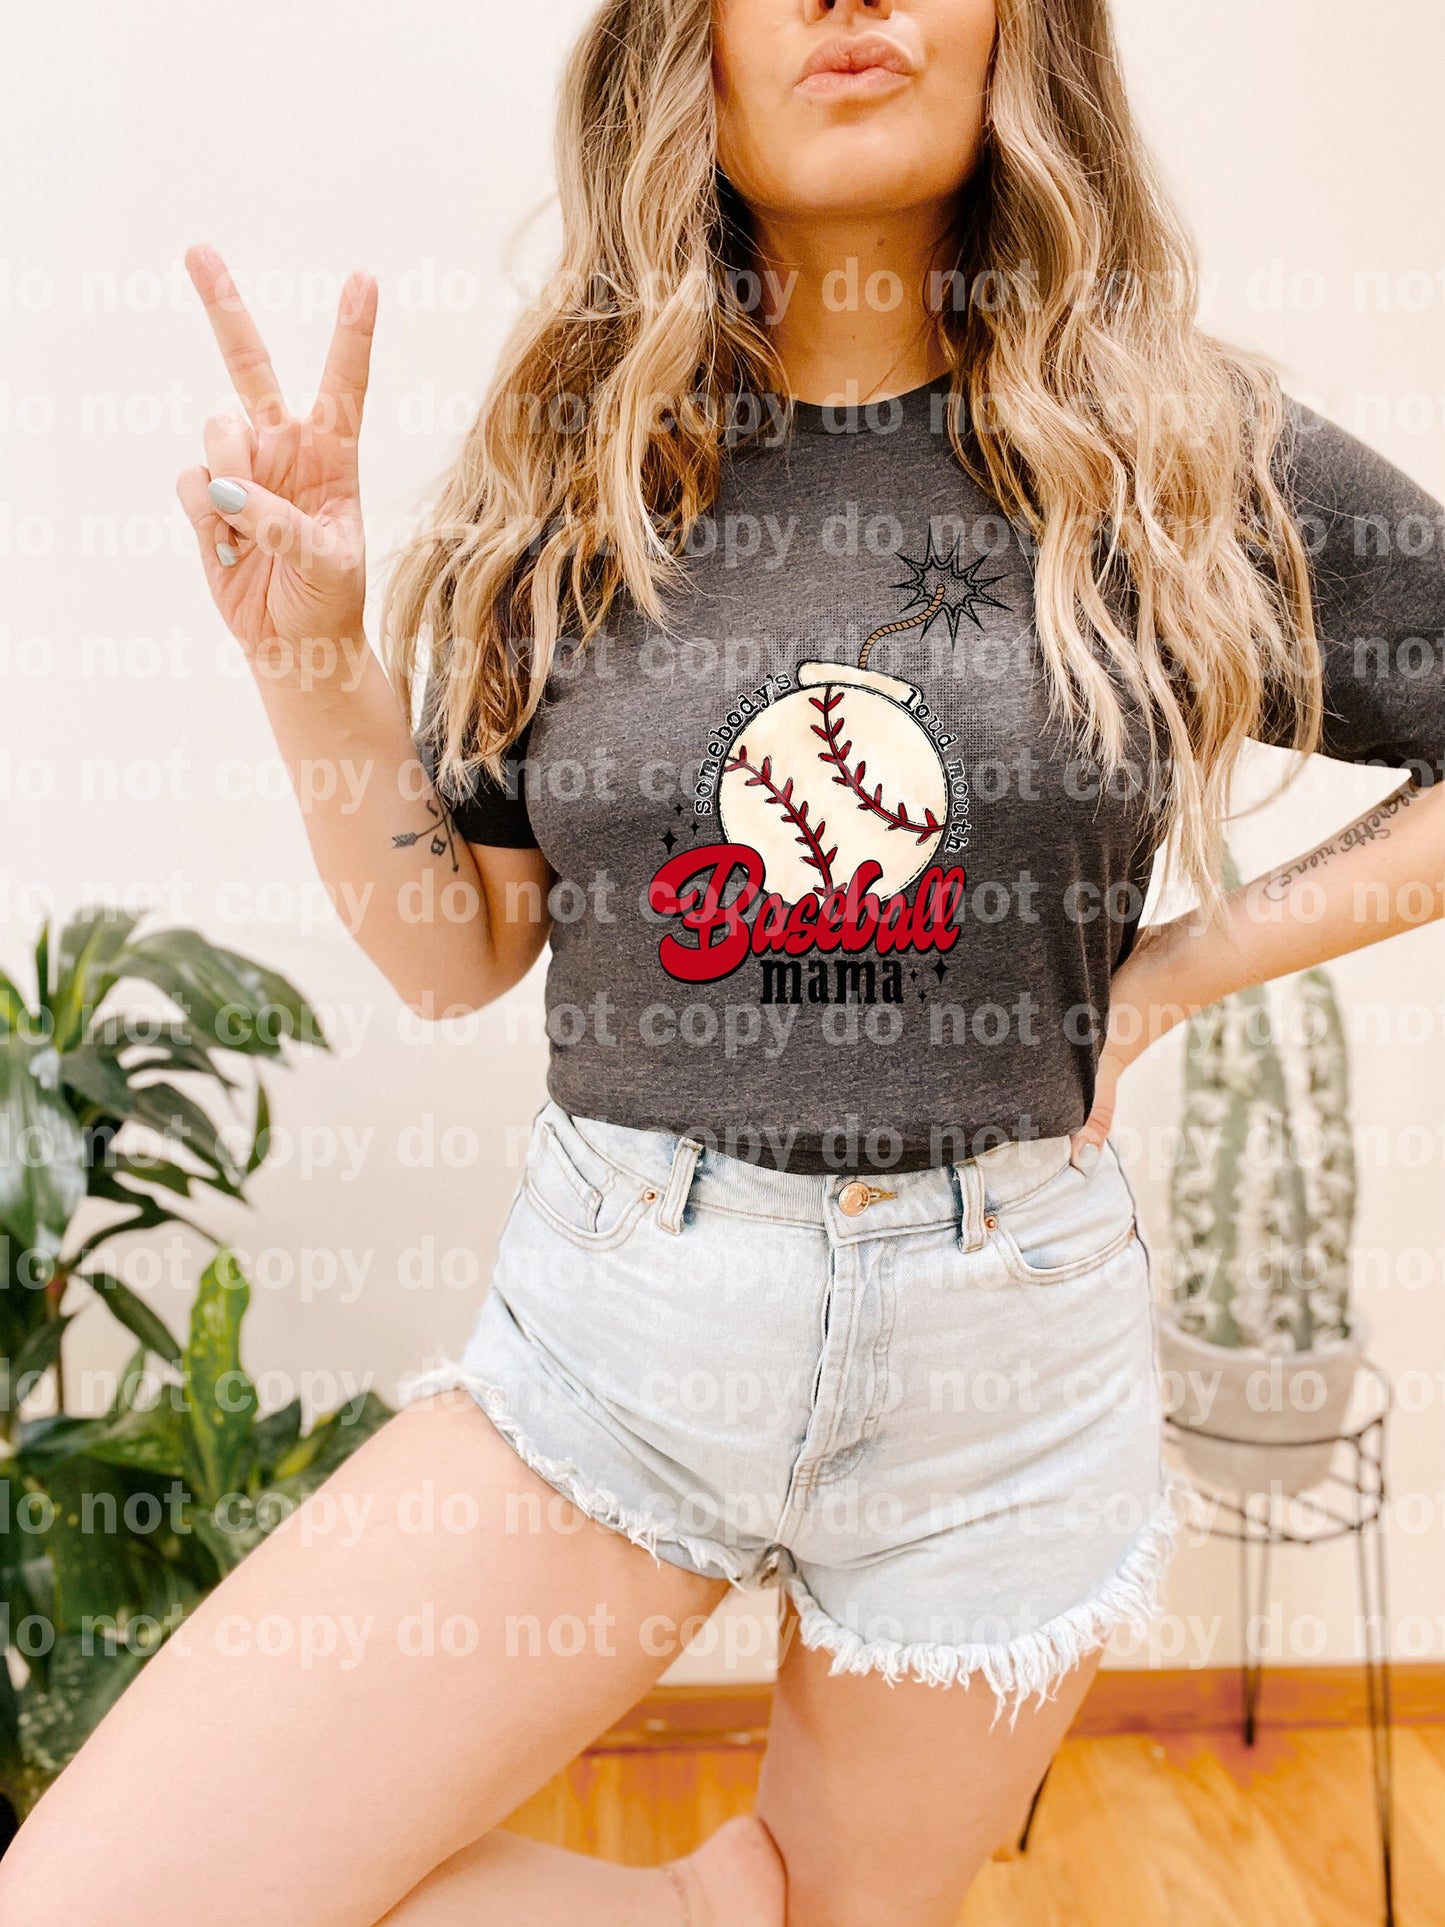 Somebody's Loud Mouth Baseball Mama Dream Print or Sublimation Print